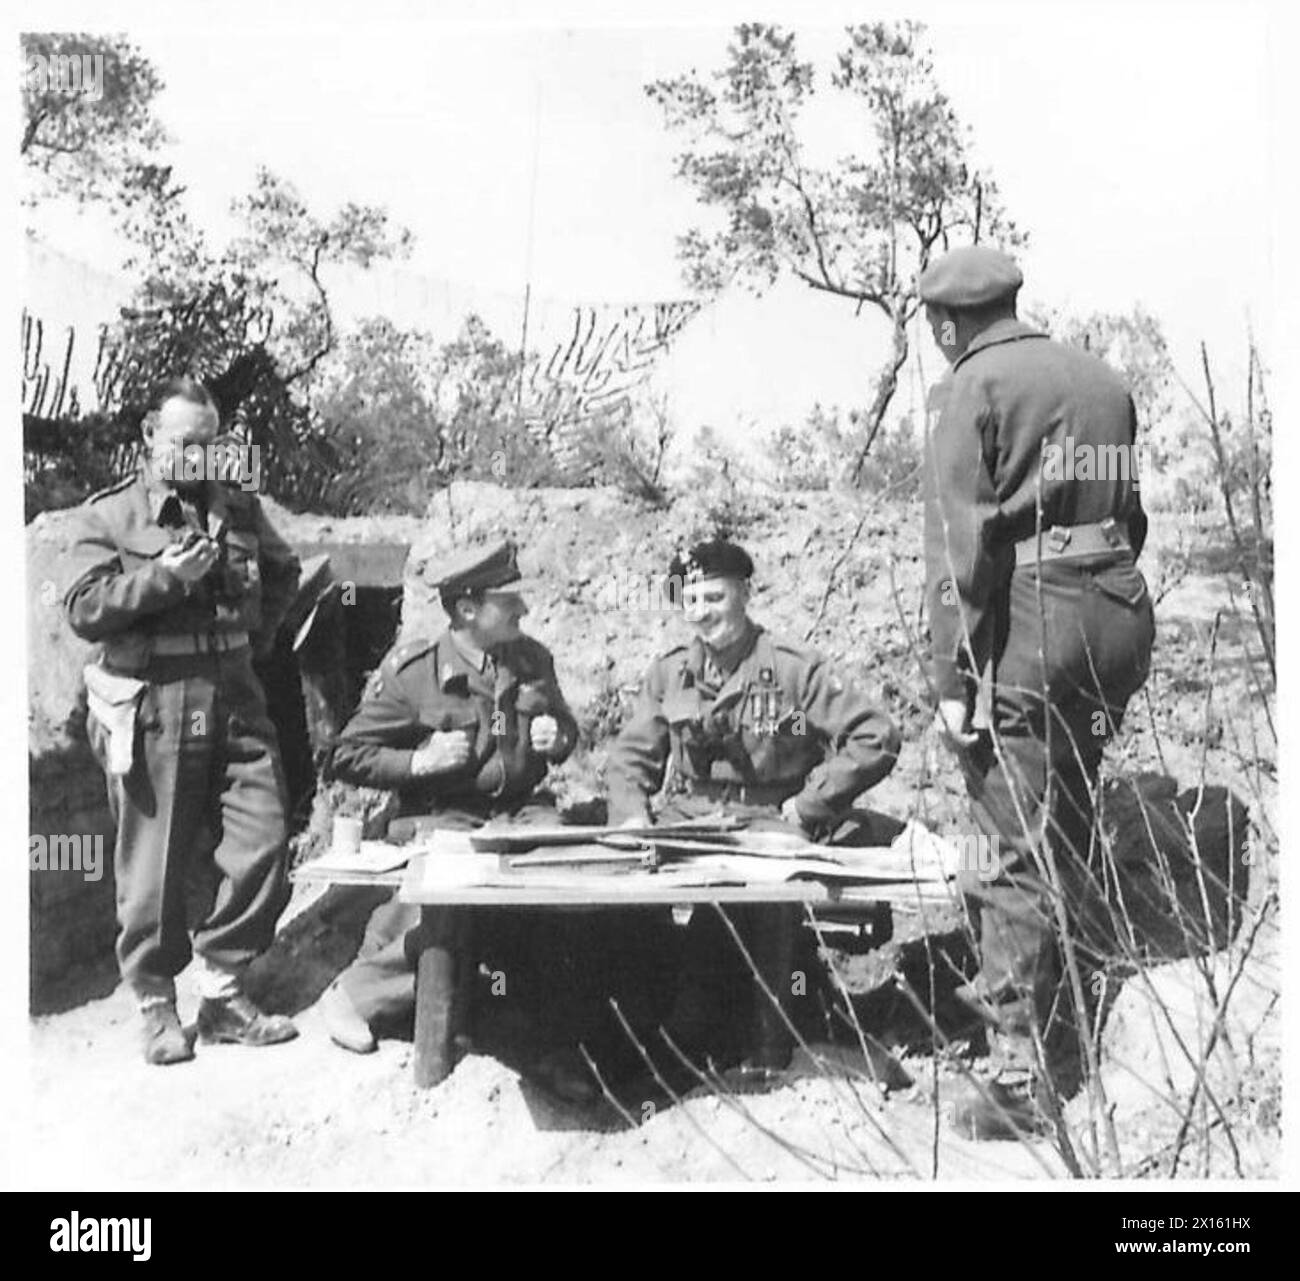 ALLIED ARMIES IN THE ITALIAN CAMPAIGN, 1943-1945 - General Władysław Anders, the CO of the 2nd Polish Corps (second from the right) and General Charles Keightley, the CO of the British 78th Infantry Division (second from the left) sitting outside General Keightley's dugout with maps and air recce photos. They are accompanied by Brigadier Thrith (far left) and Lieutenant Eugeniusz Lubomirski, General Anders' adjutant (far right).Photograph taken during General Anders' visit to the 78th Division at Cervaro (near Cassino) British Army, Polish Army, Polish Armed Forces in the West, Polish Corps, I Stock Photo